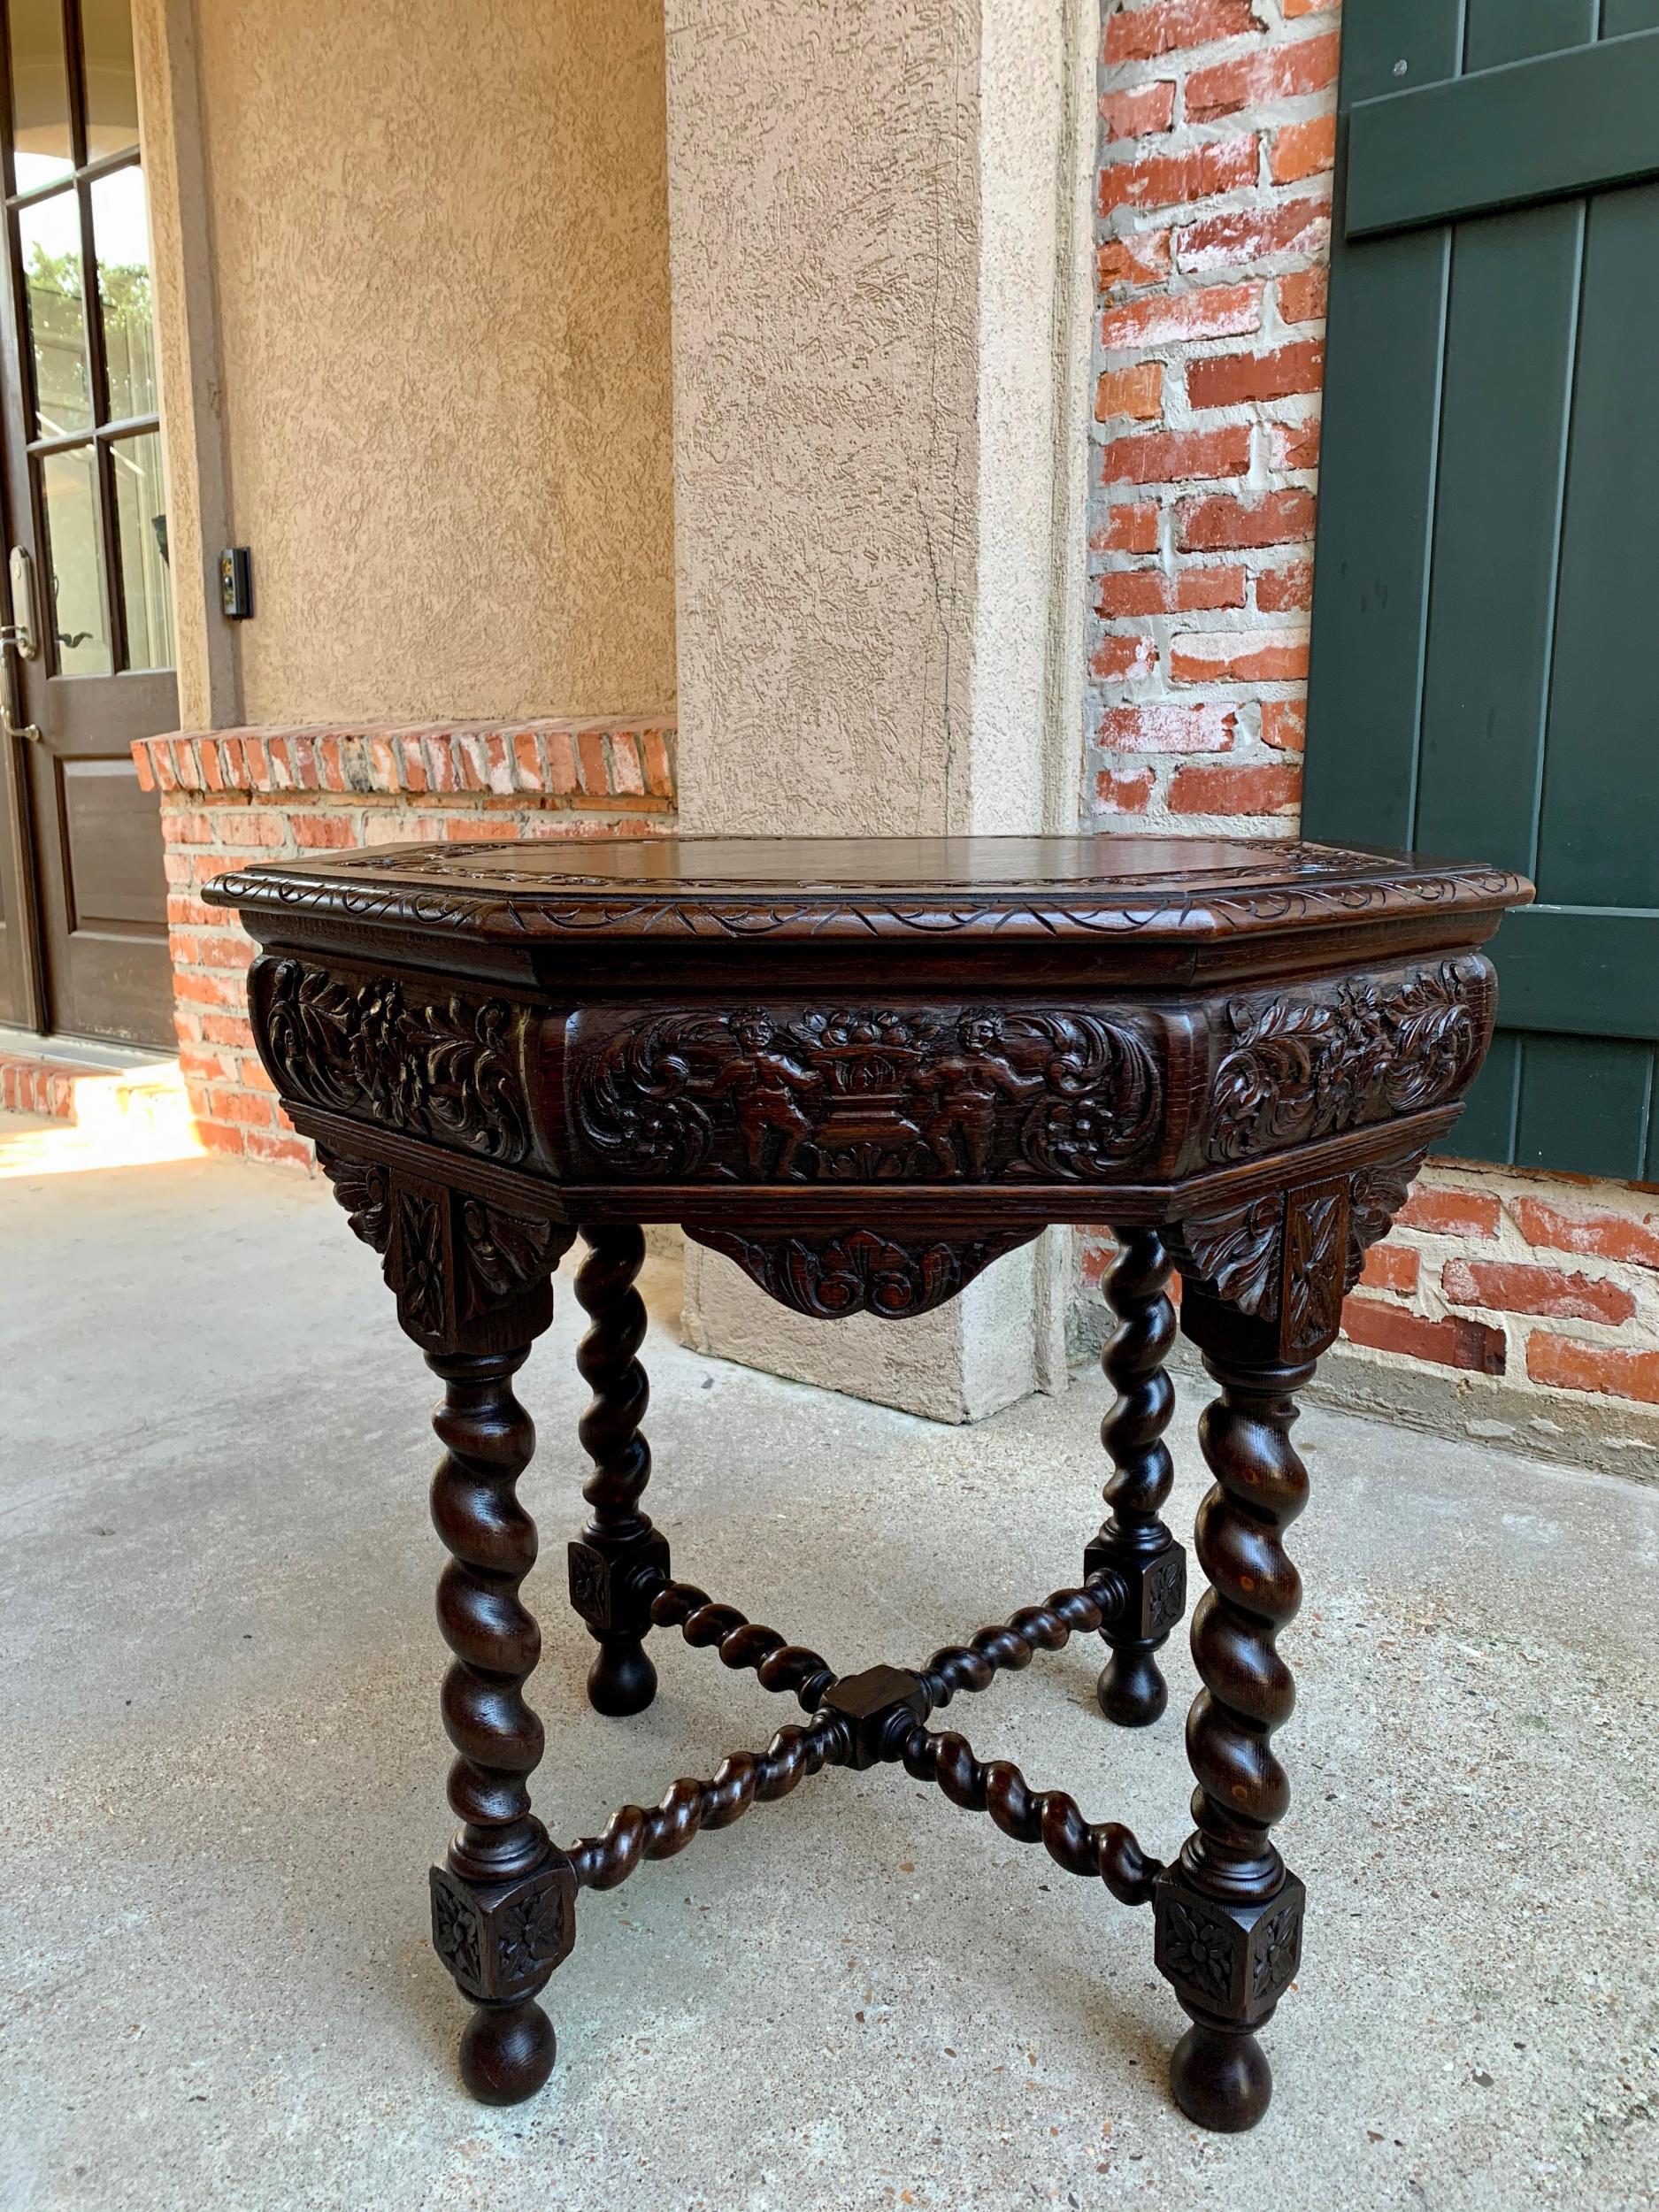 Antique French octagon table barley twist carved oak center sofa renaissance
 
~Direct from France~
~Ornately carved antique French “octagonal” table with impressive silhouette and commanding design!~
~(This style table was originally used with